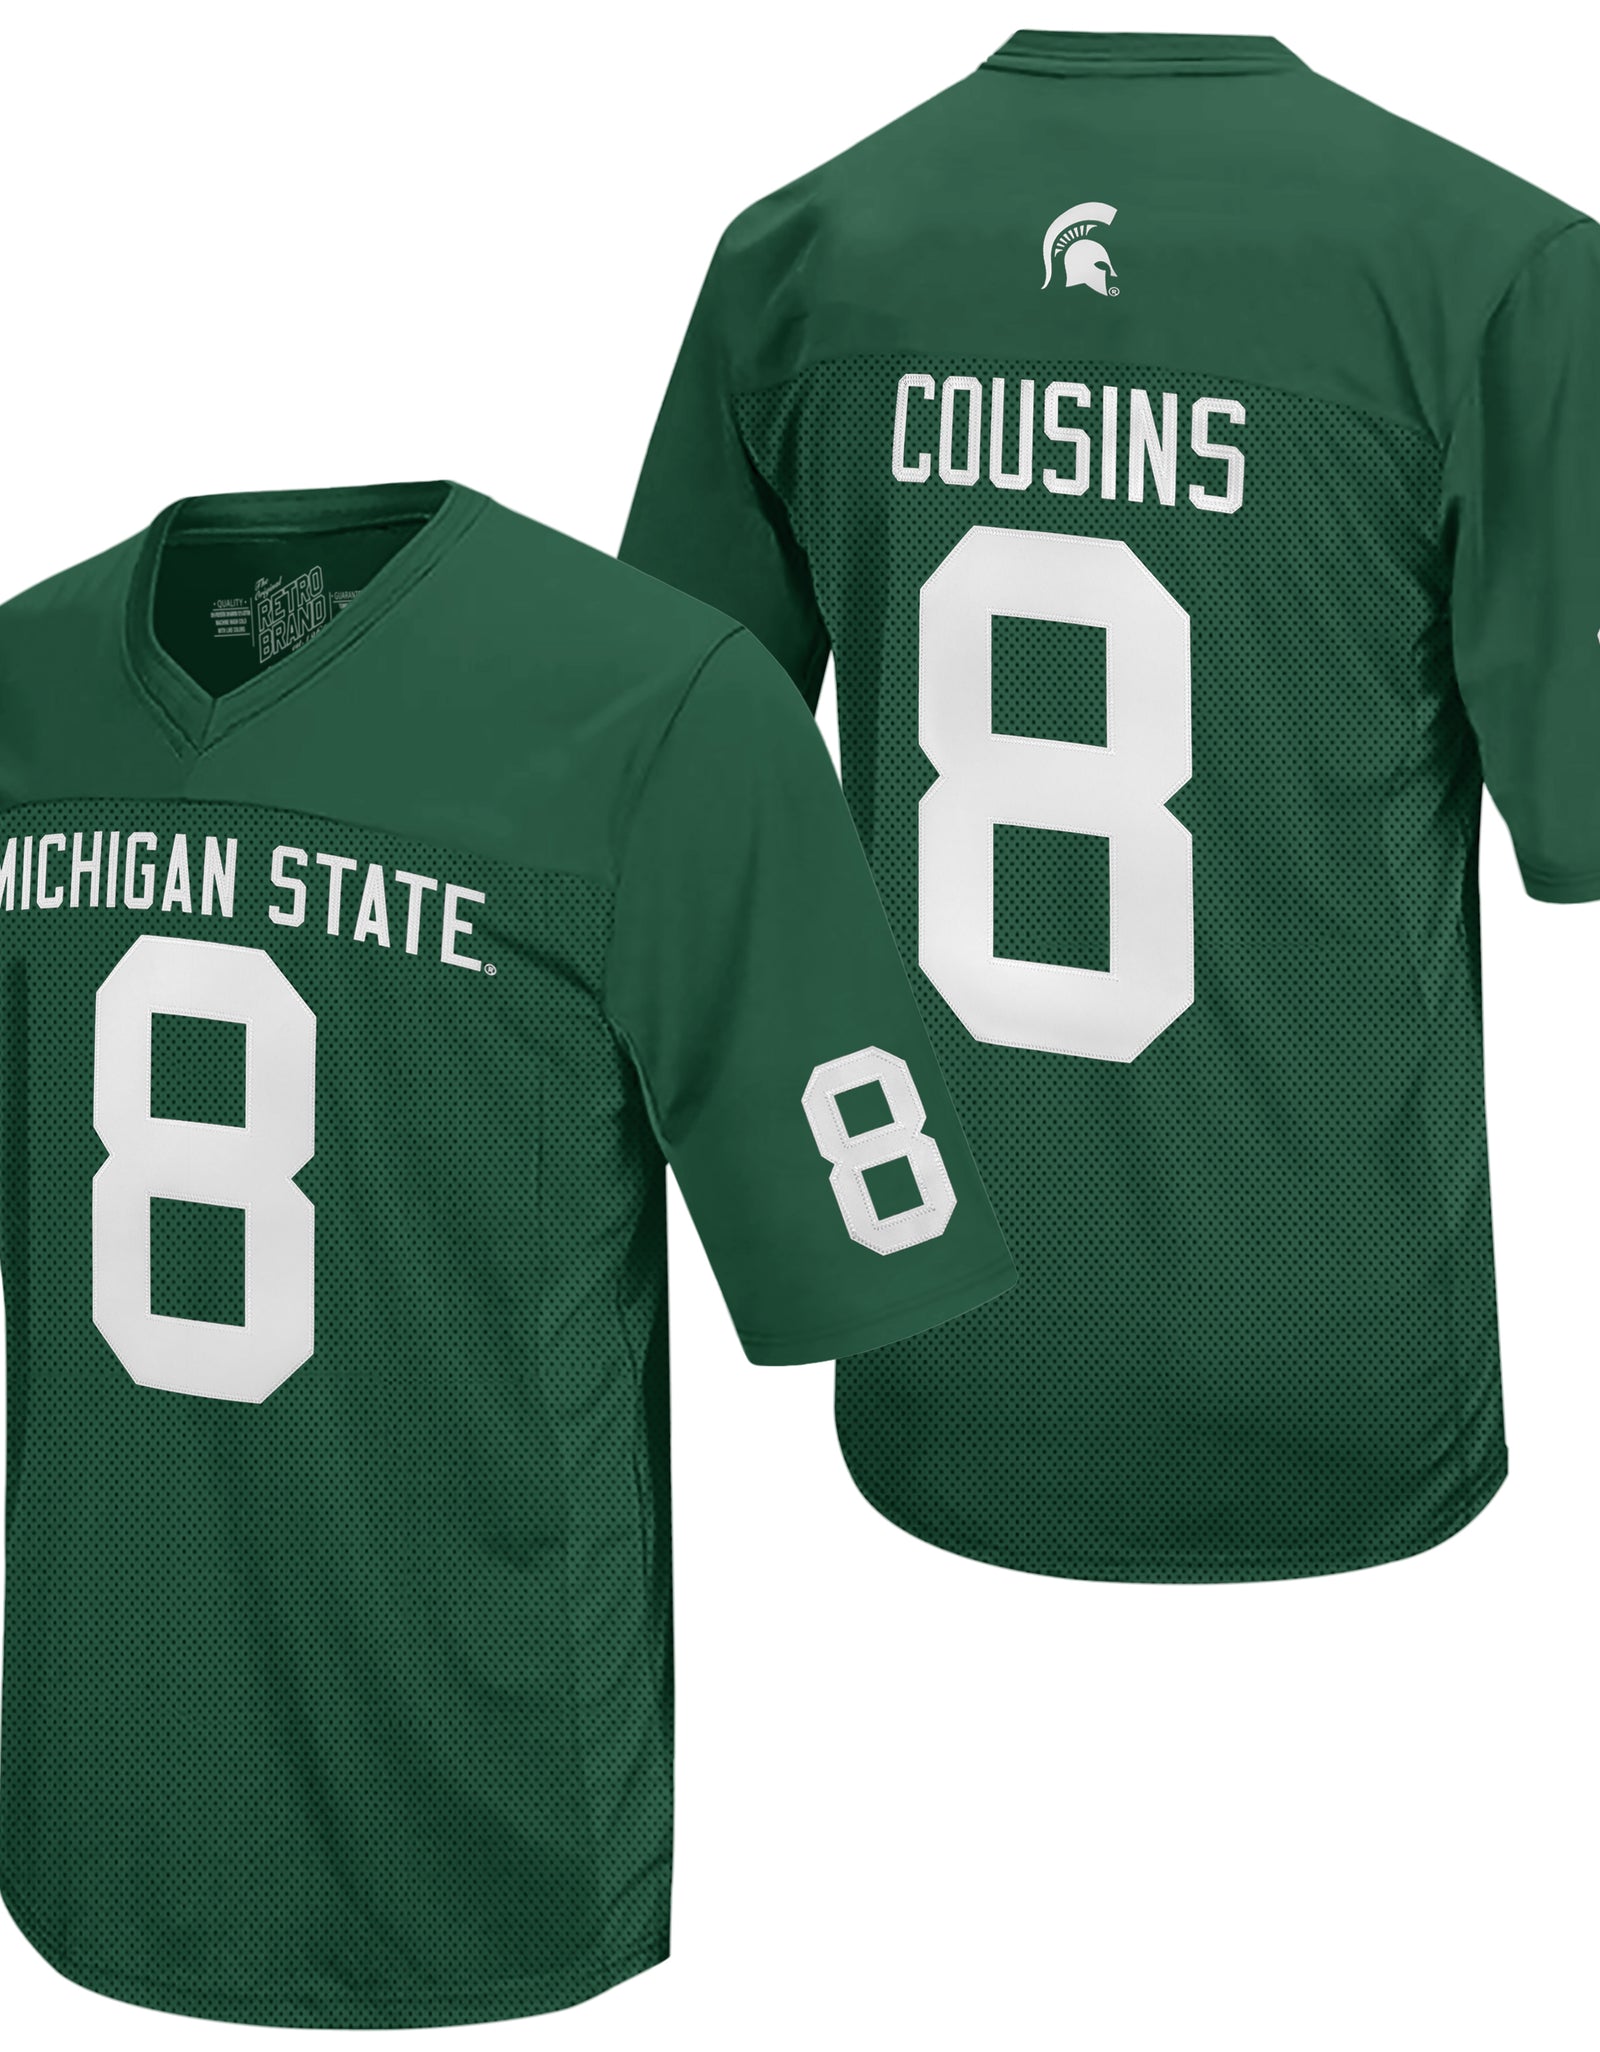 Michigan State Spartans Kirk Cousins Throwback Jersey